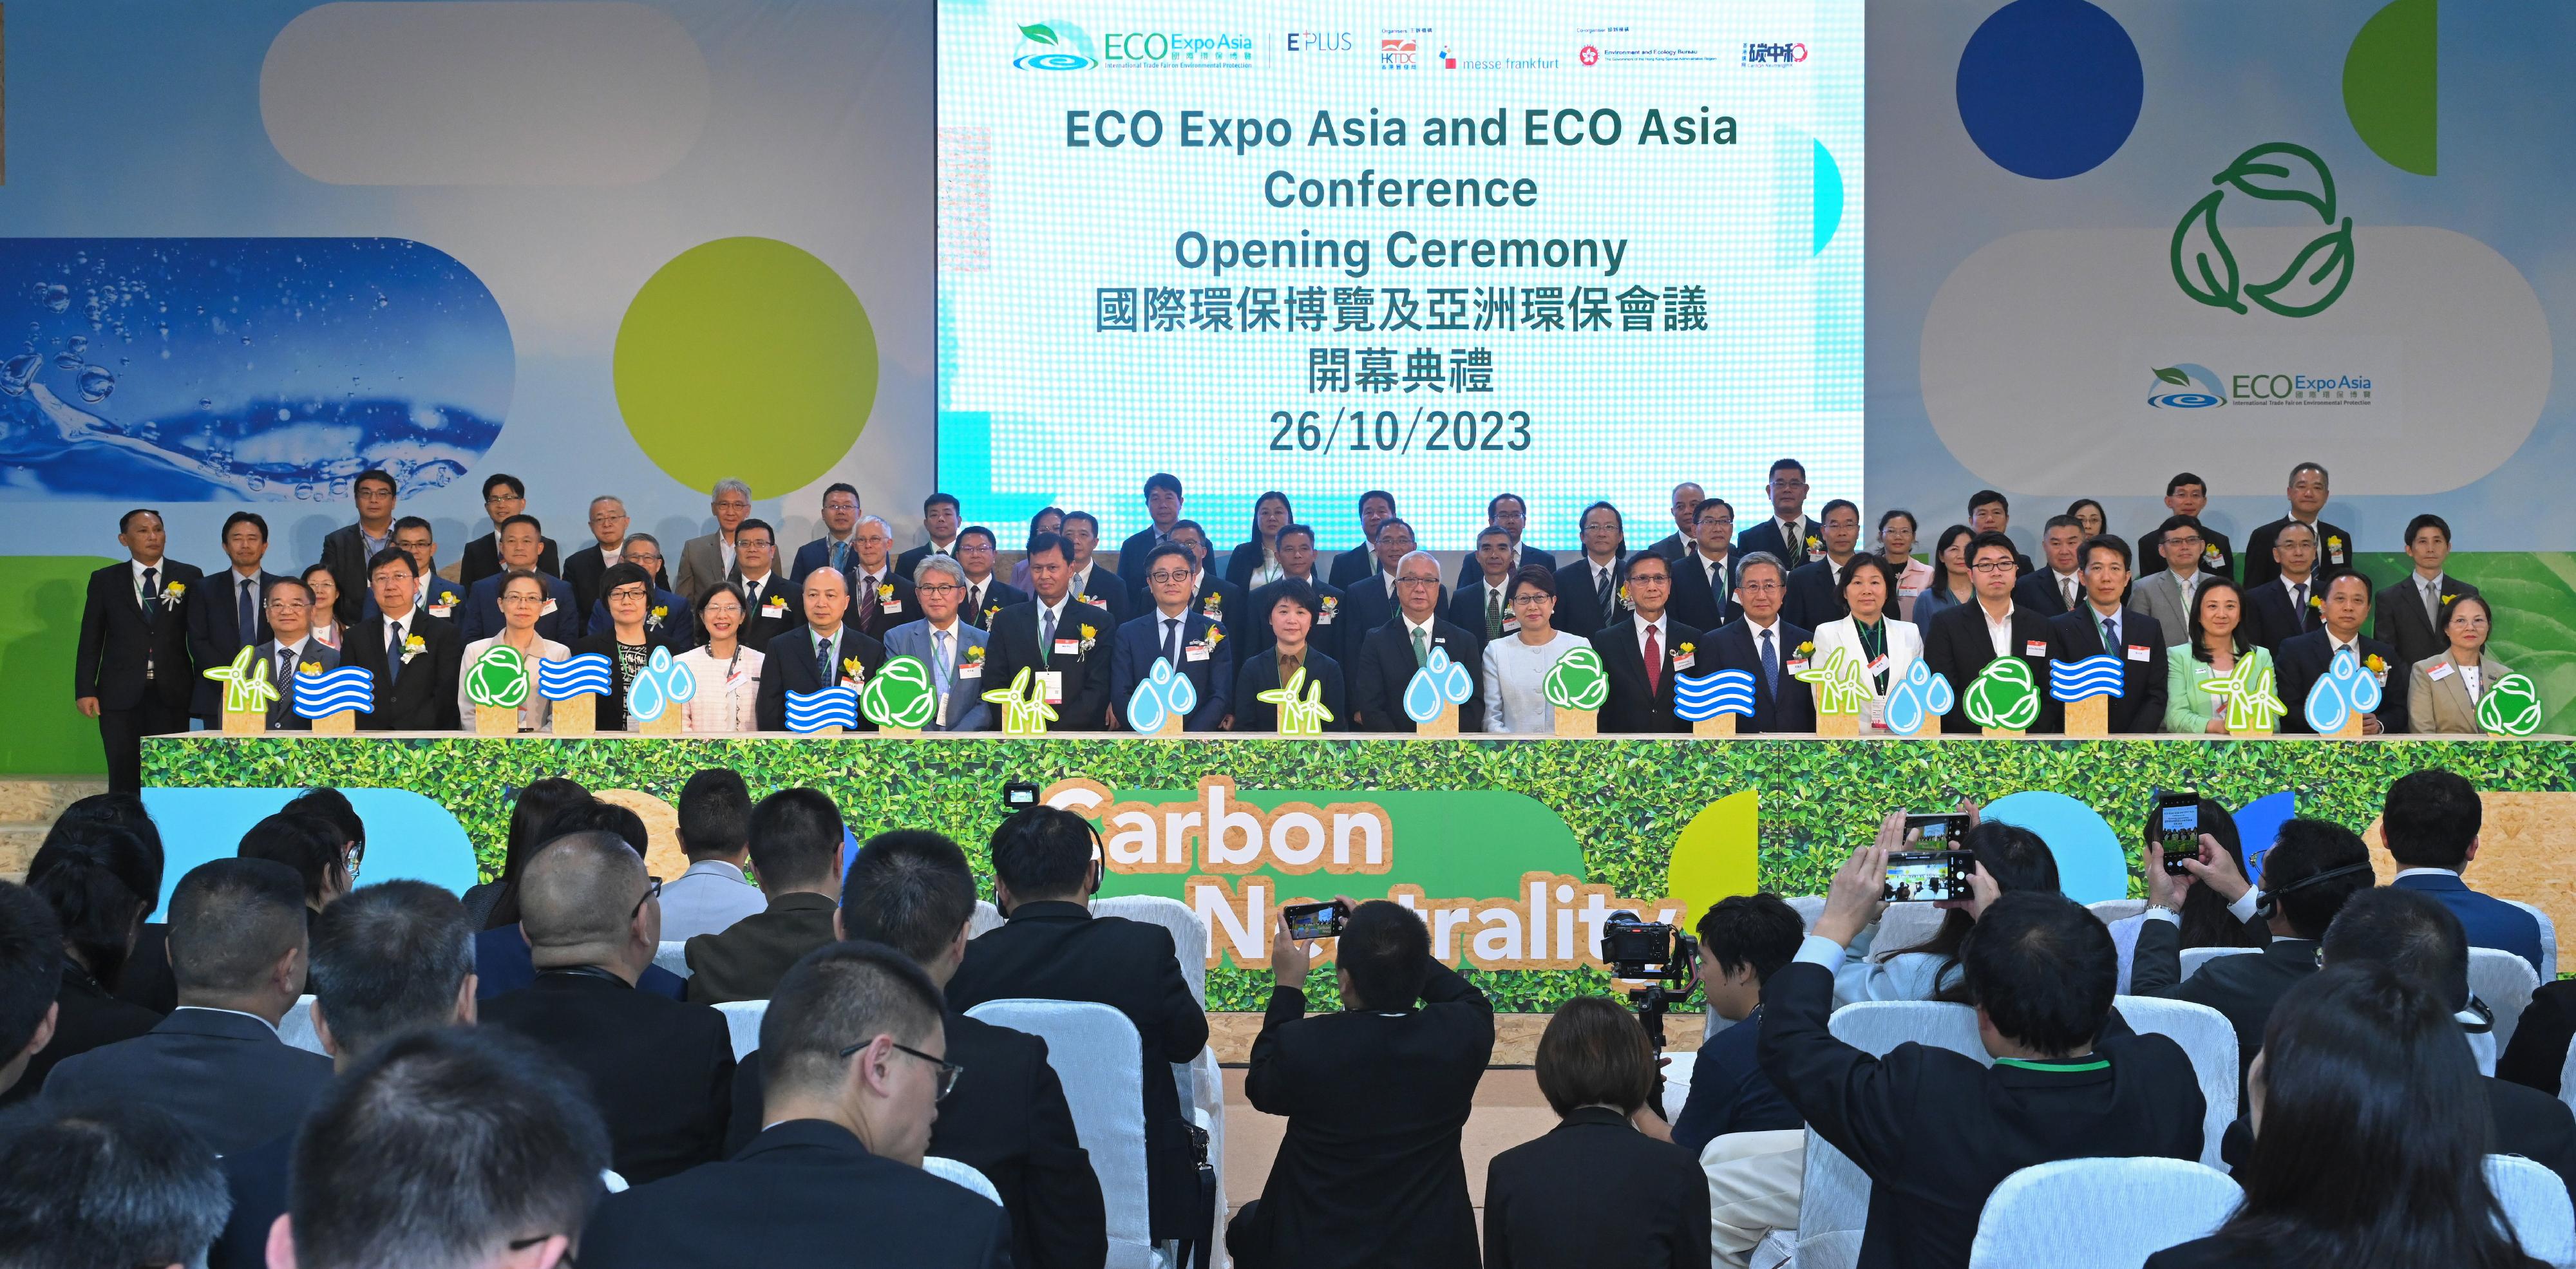 Vice Minister, member of the Leading Party Members Group of the Ministry of Ecology and Environment of the People's Republic of China, Ms Guo Fang (front row, 10th left); the Secretary for Environment and Ecology, Mr Tse Chin-wan (front row, 10th right); and the Permanent Secretary for Environment and Ecology (Environment), Miss Janice Tse (front row, fifth left), officiate with other guests at the opening ceremony of the 18th Eco Expo Asia at AsiaWorld-Expo today (October 26).
